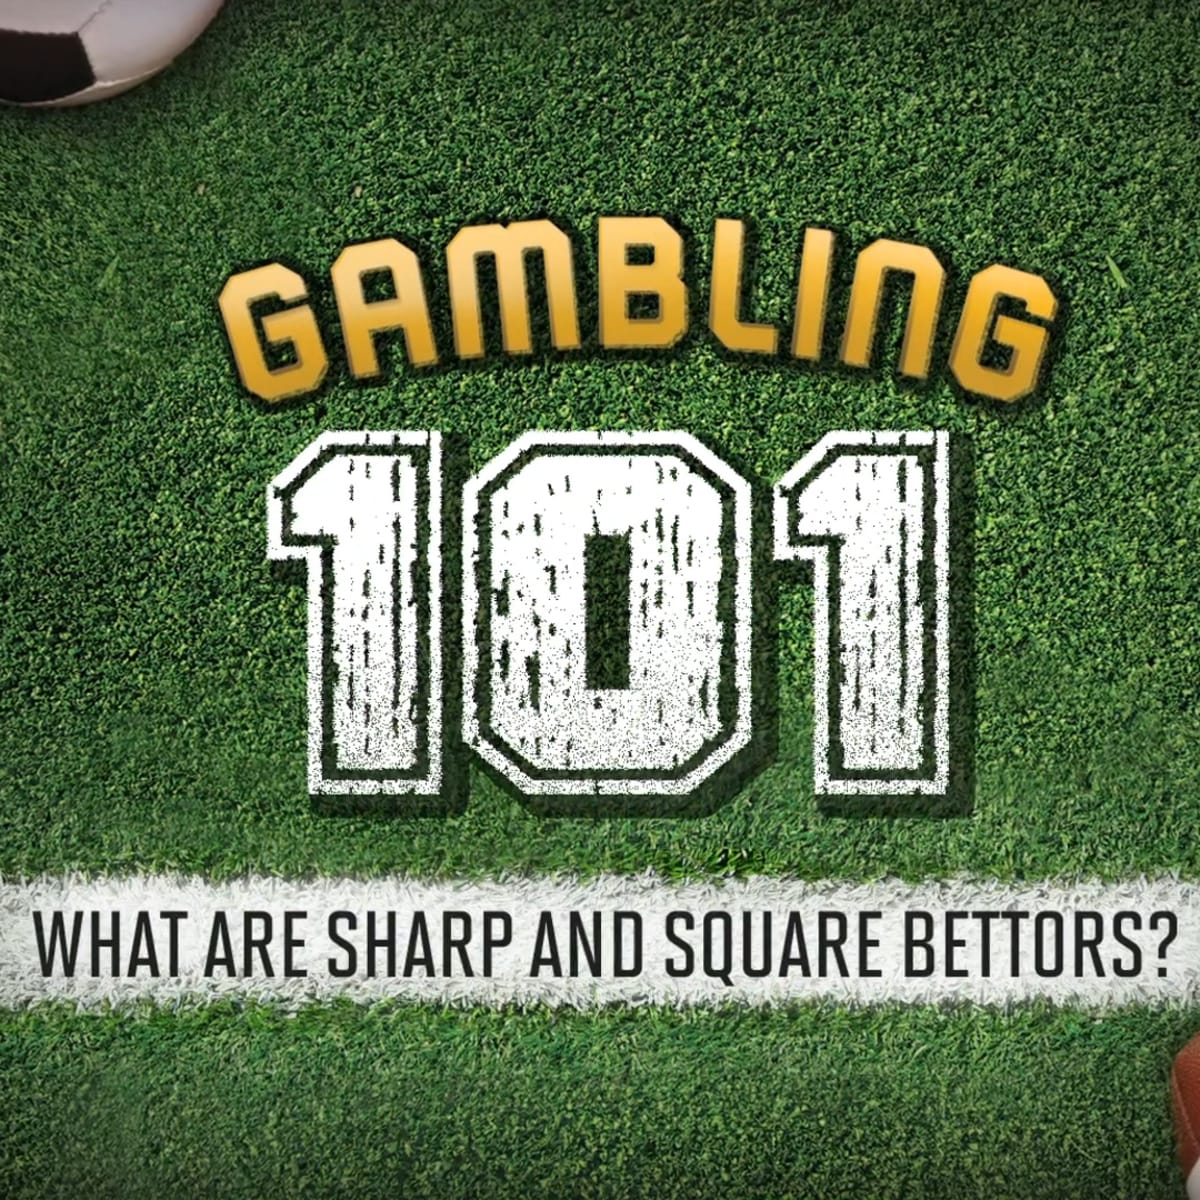 Why are Key Numbers so Important to Sharp NFL Bettors?